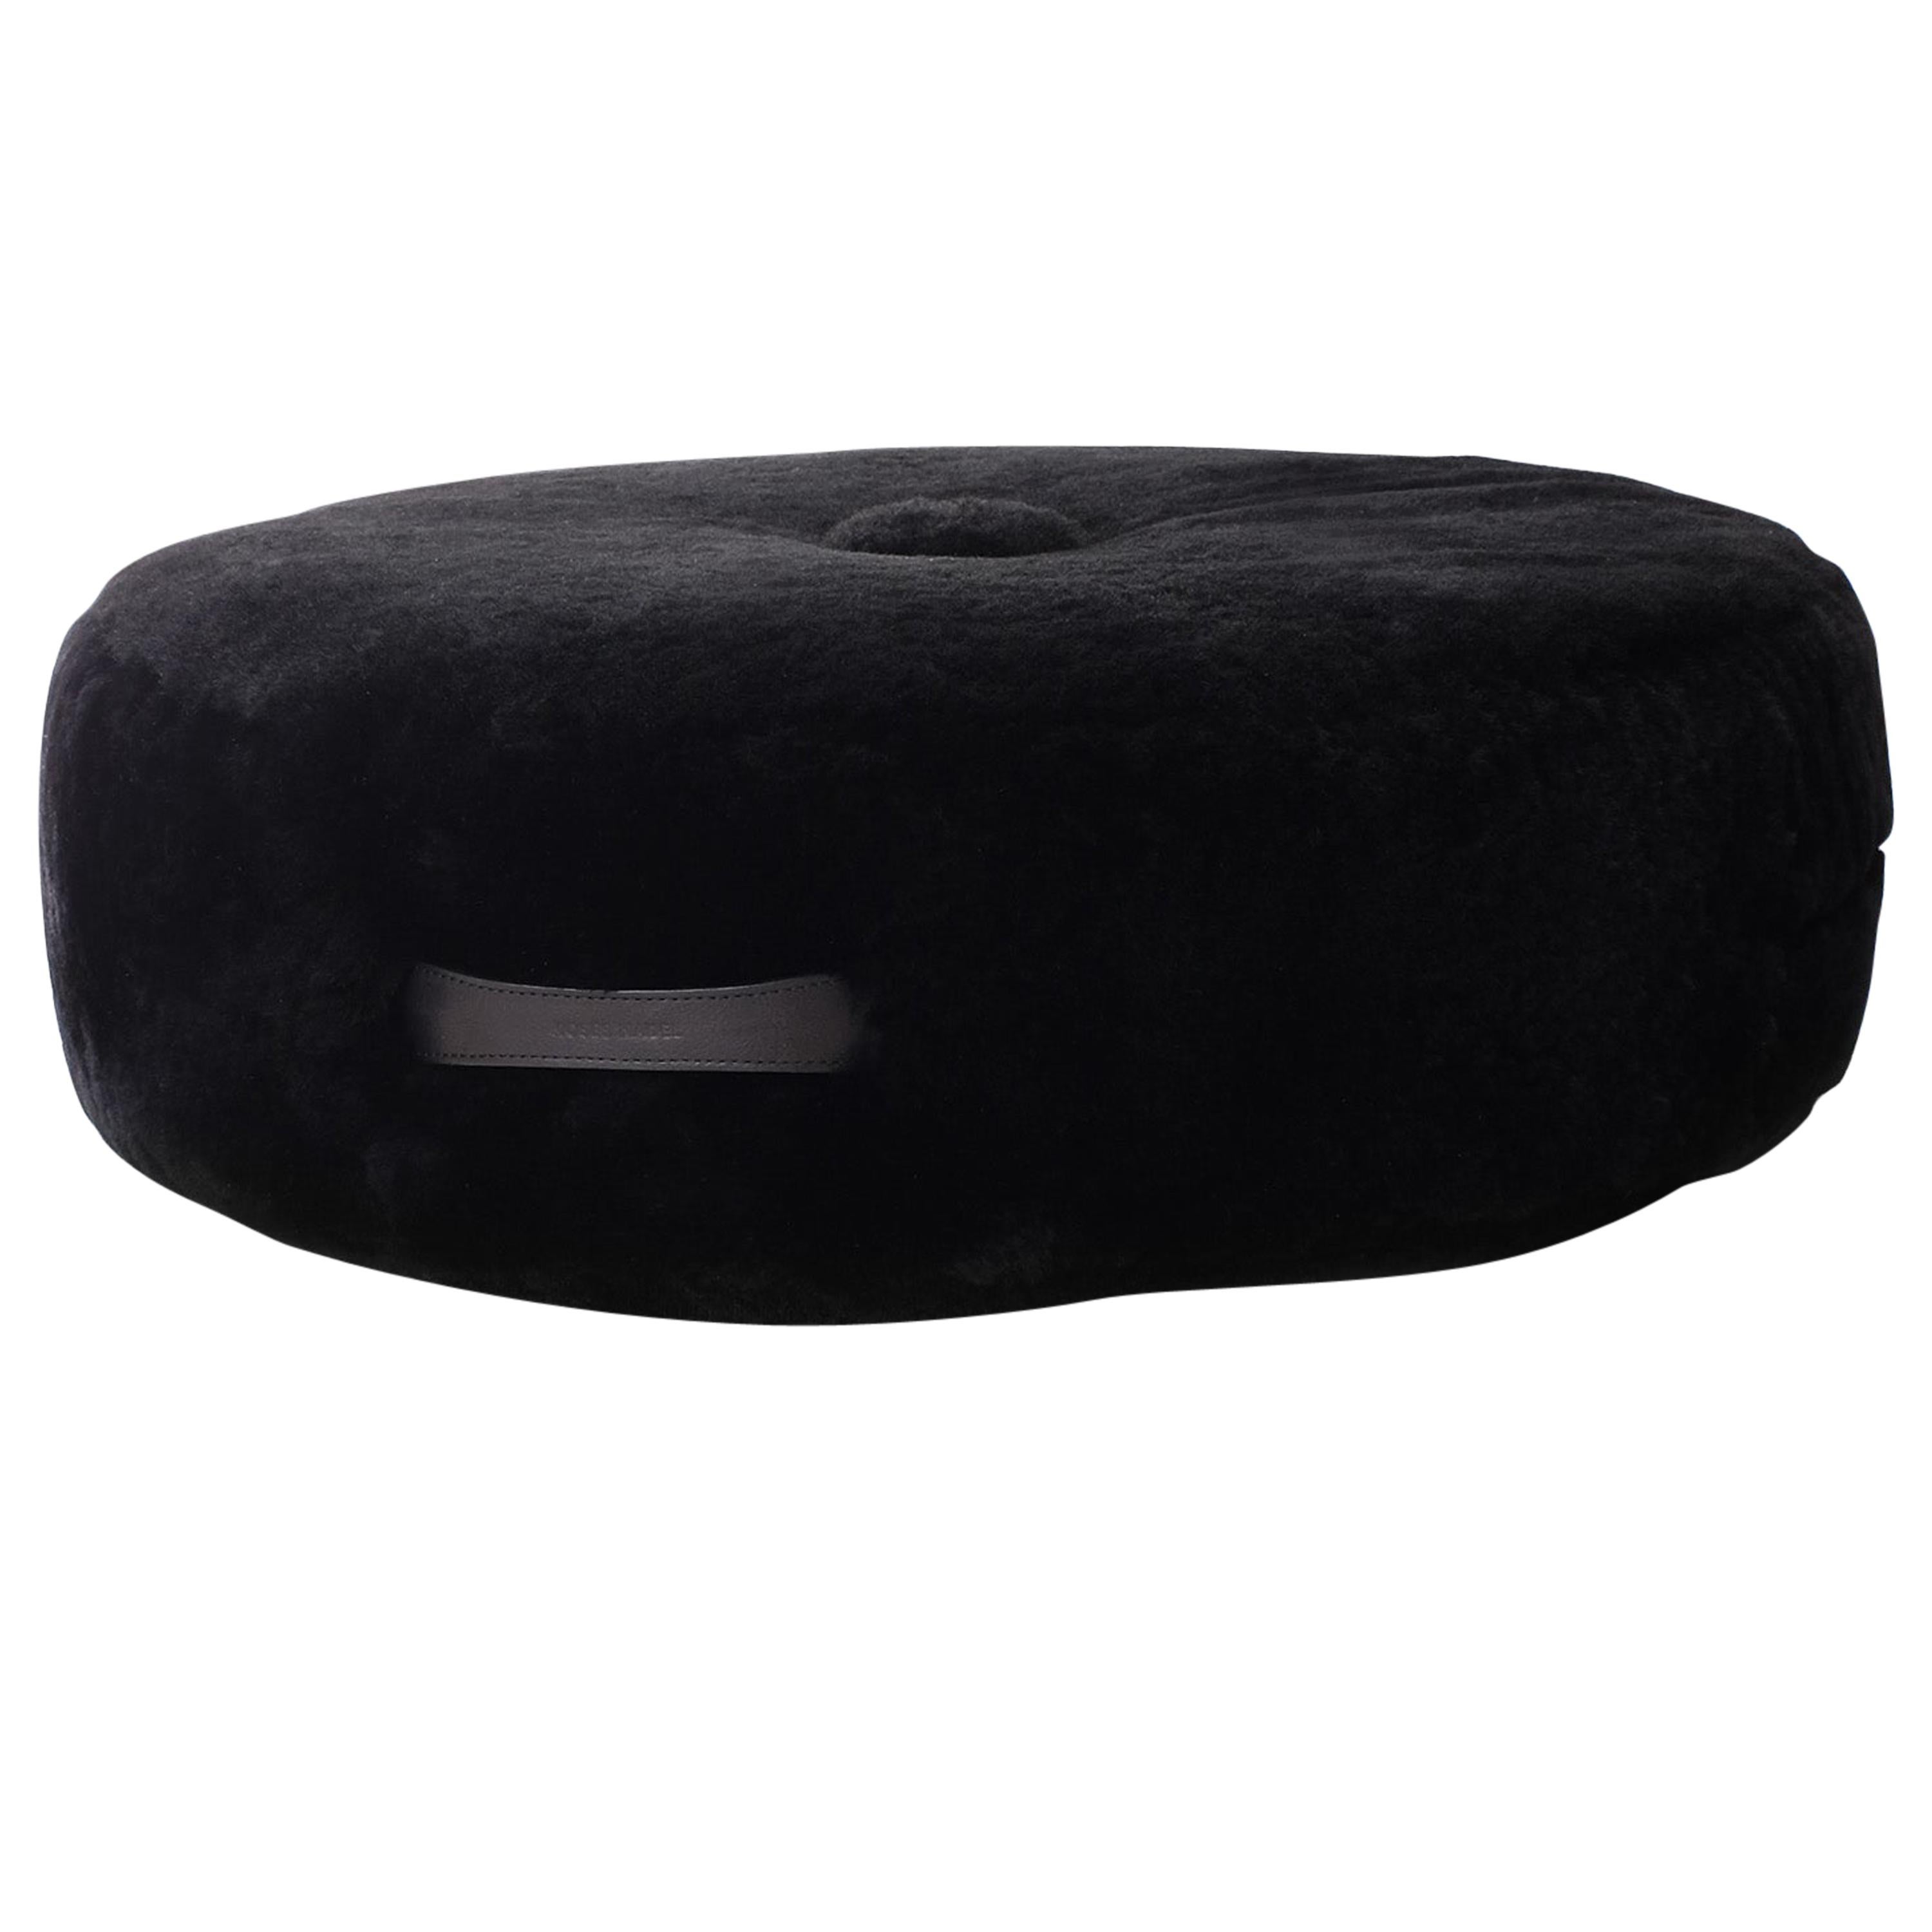 20"Ø x 5" Shearling Black Floor Cushion by Moses Nadel For Sale